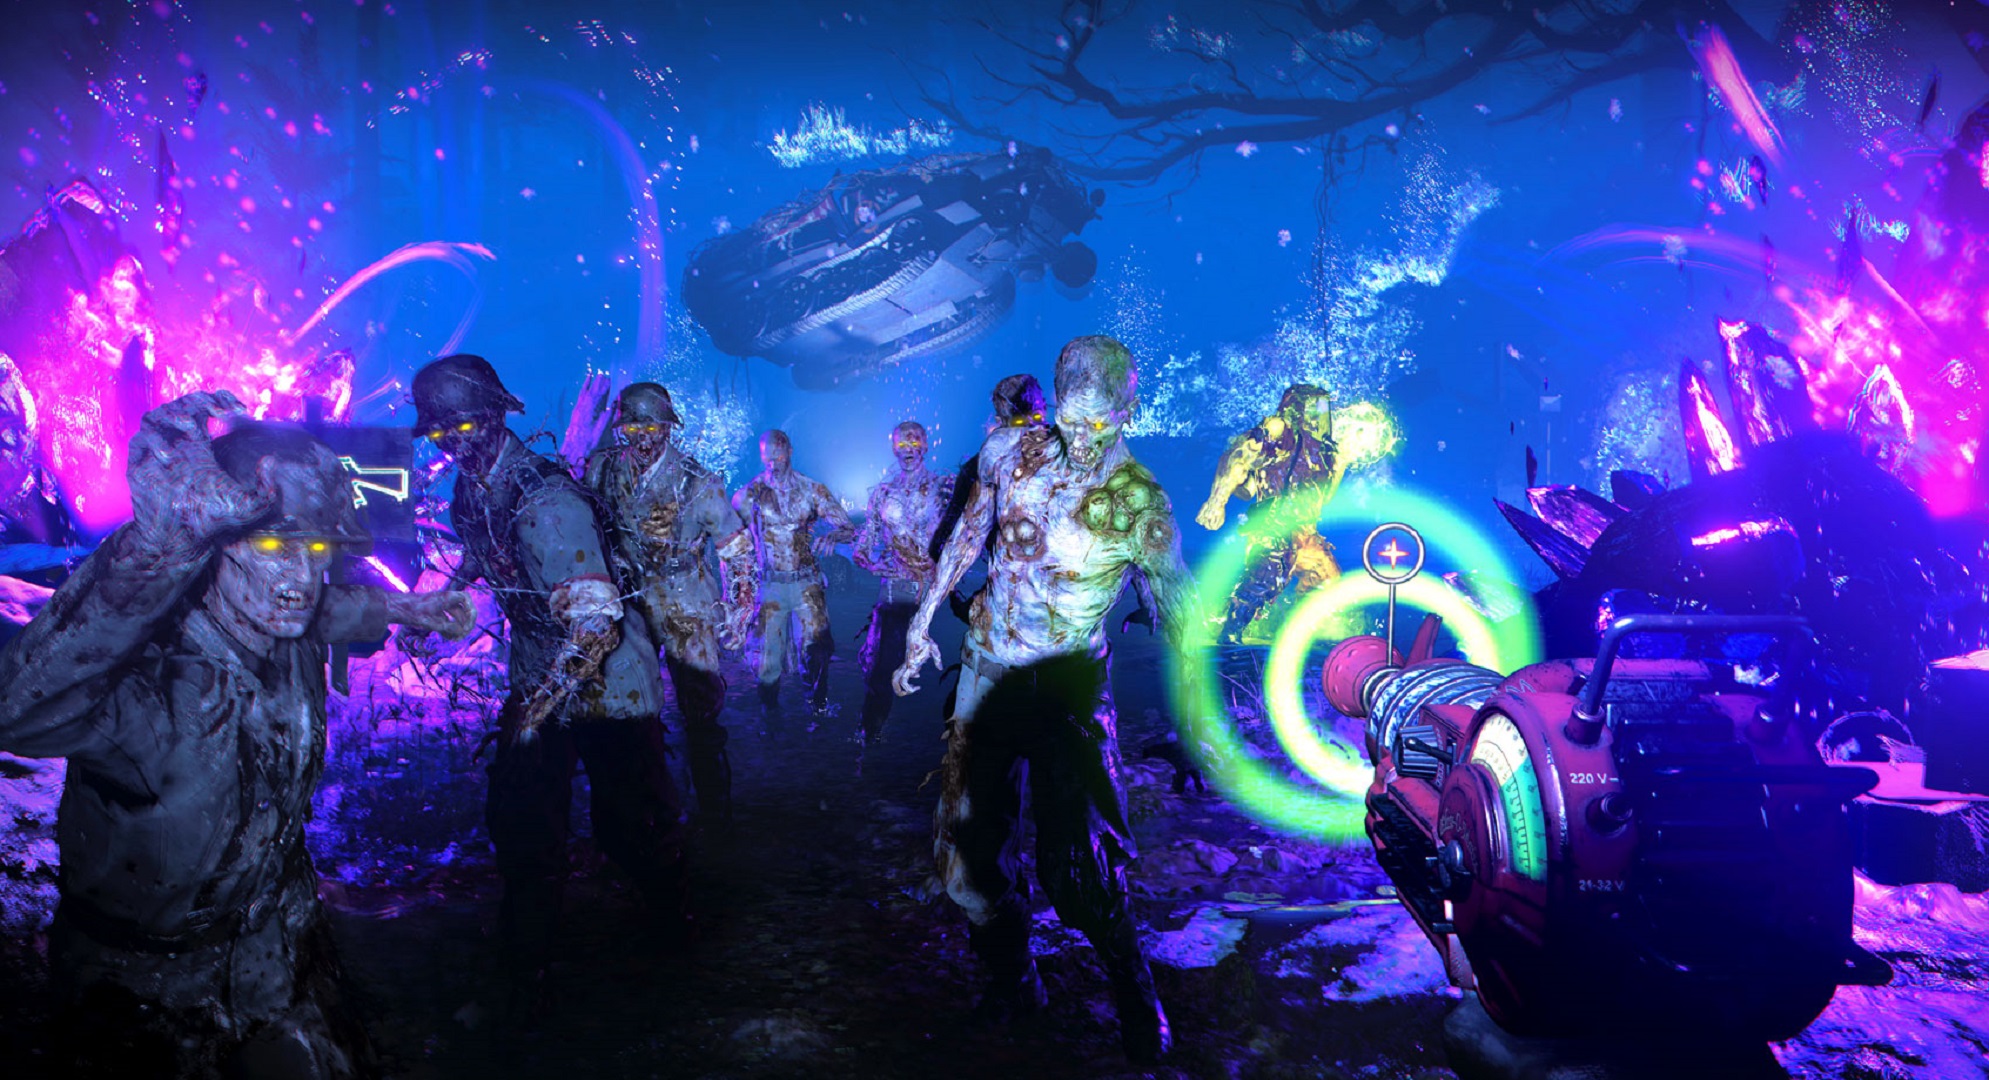 Call of Duty Black Ops Cold War multiplayer maps: A player firing a ray gun at a horde of zombies in a sci-fi environment.